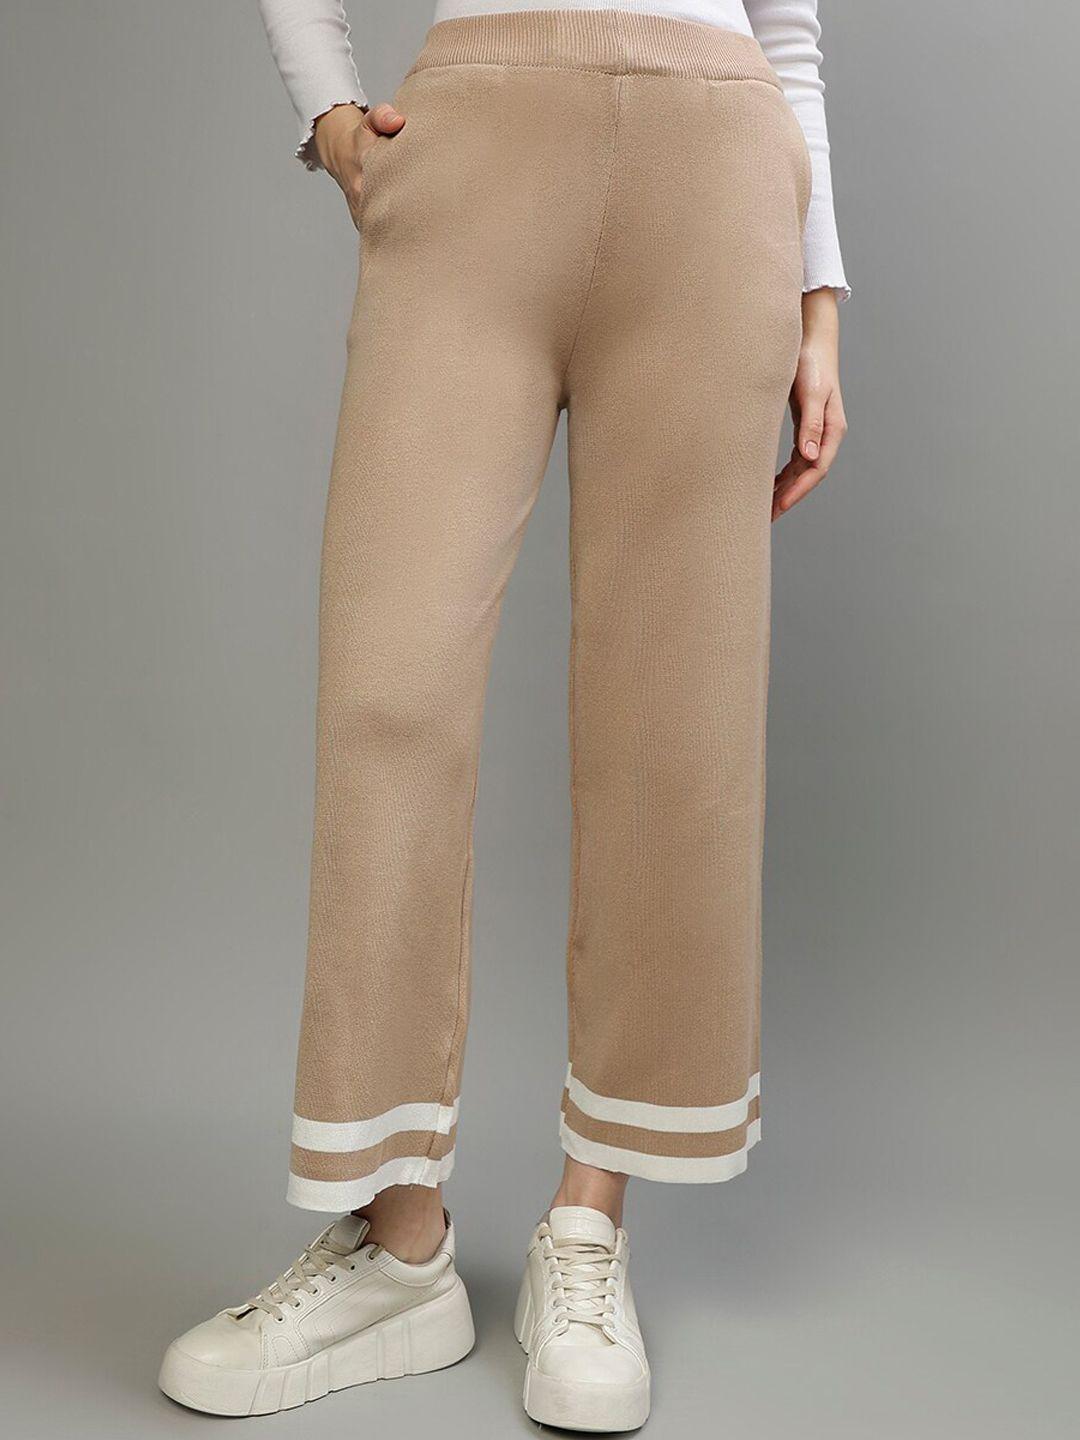 centrestage women flared trousers